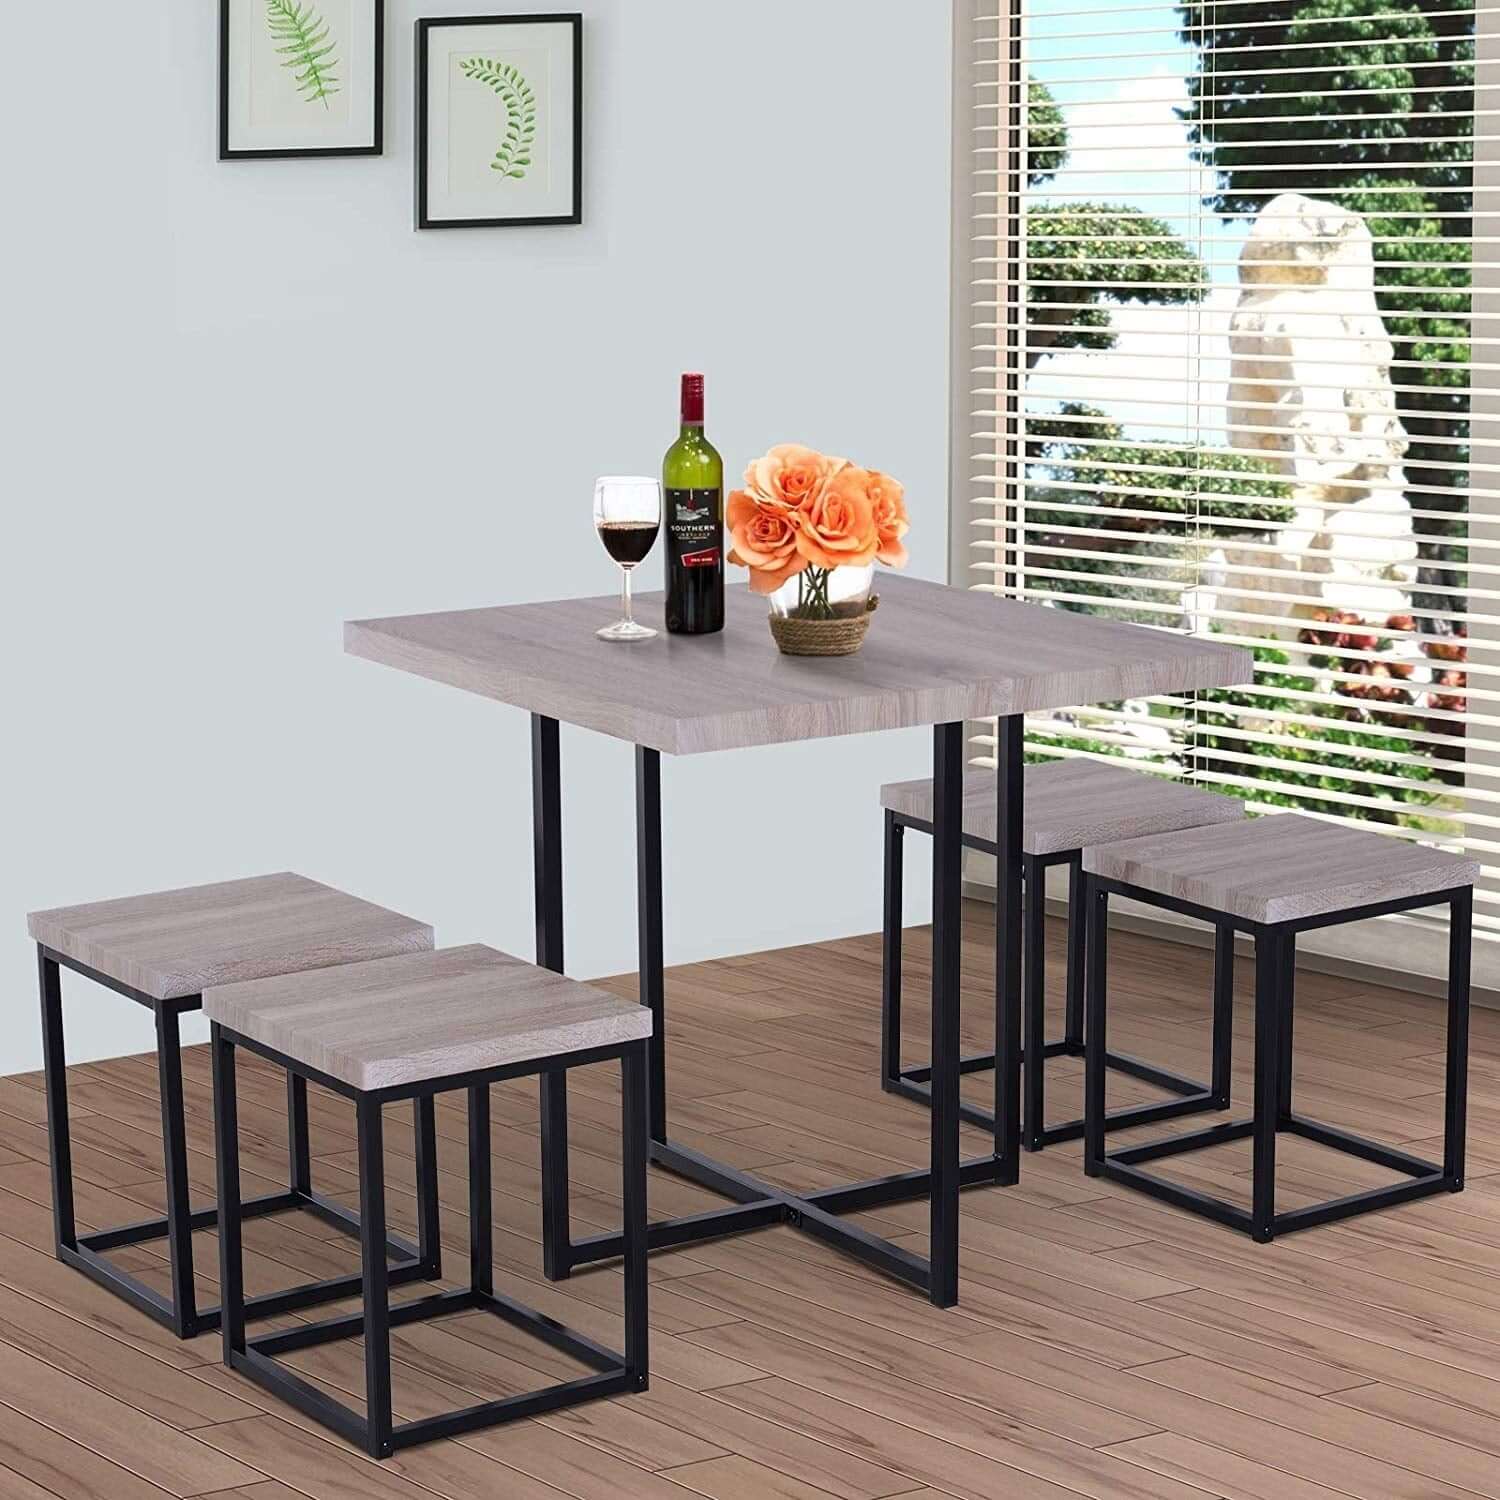 Small kitchen dining table 9